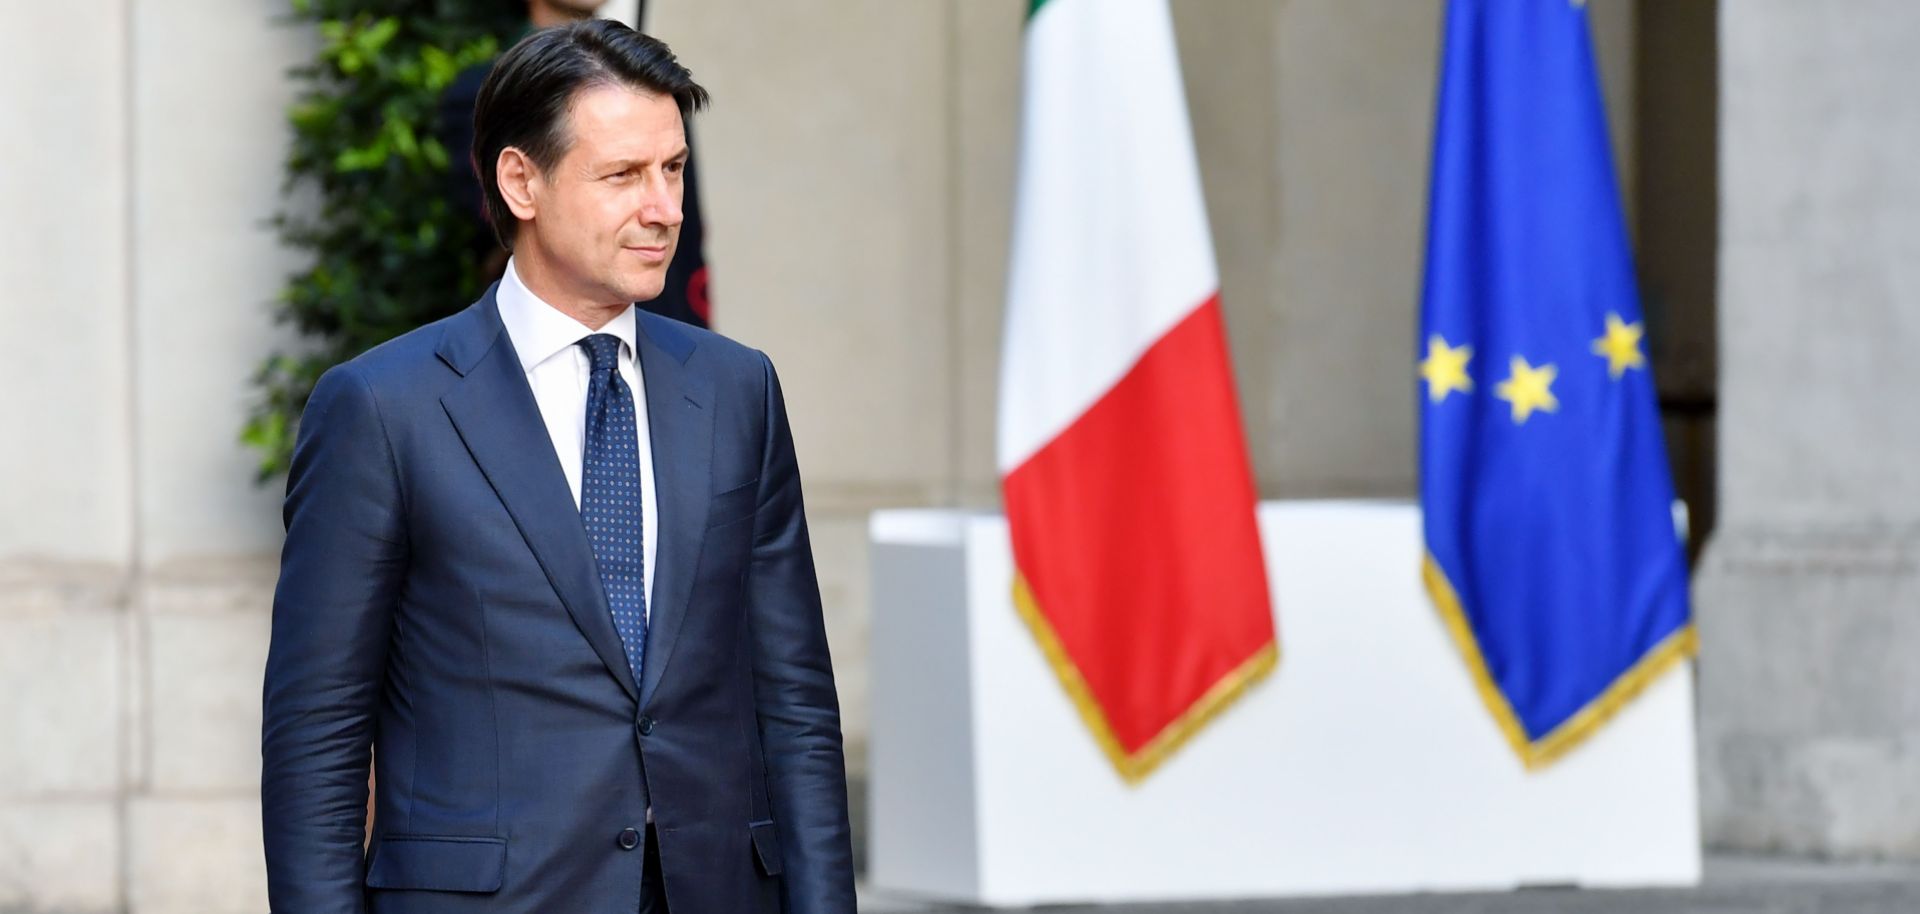 Italy's new prime minister, Giuseppe Conte, in Rome on June 1, 2018.